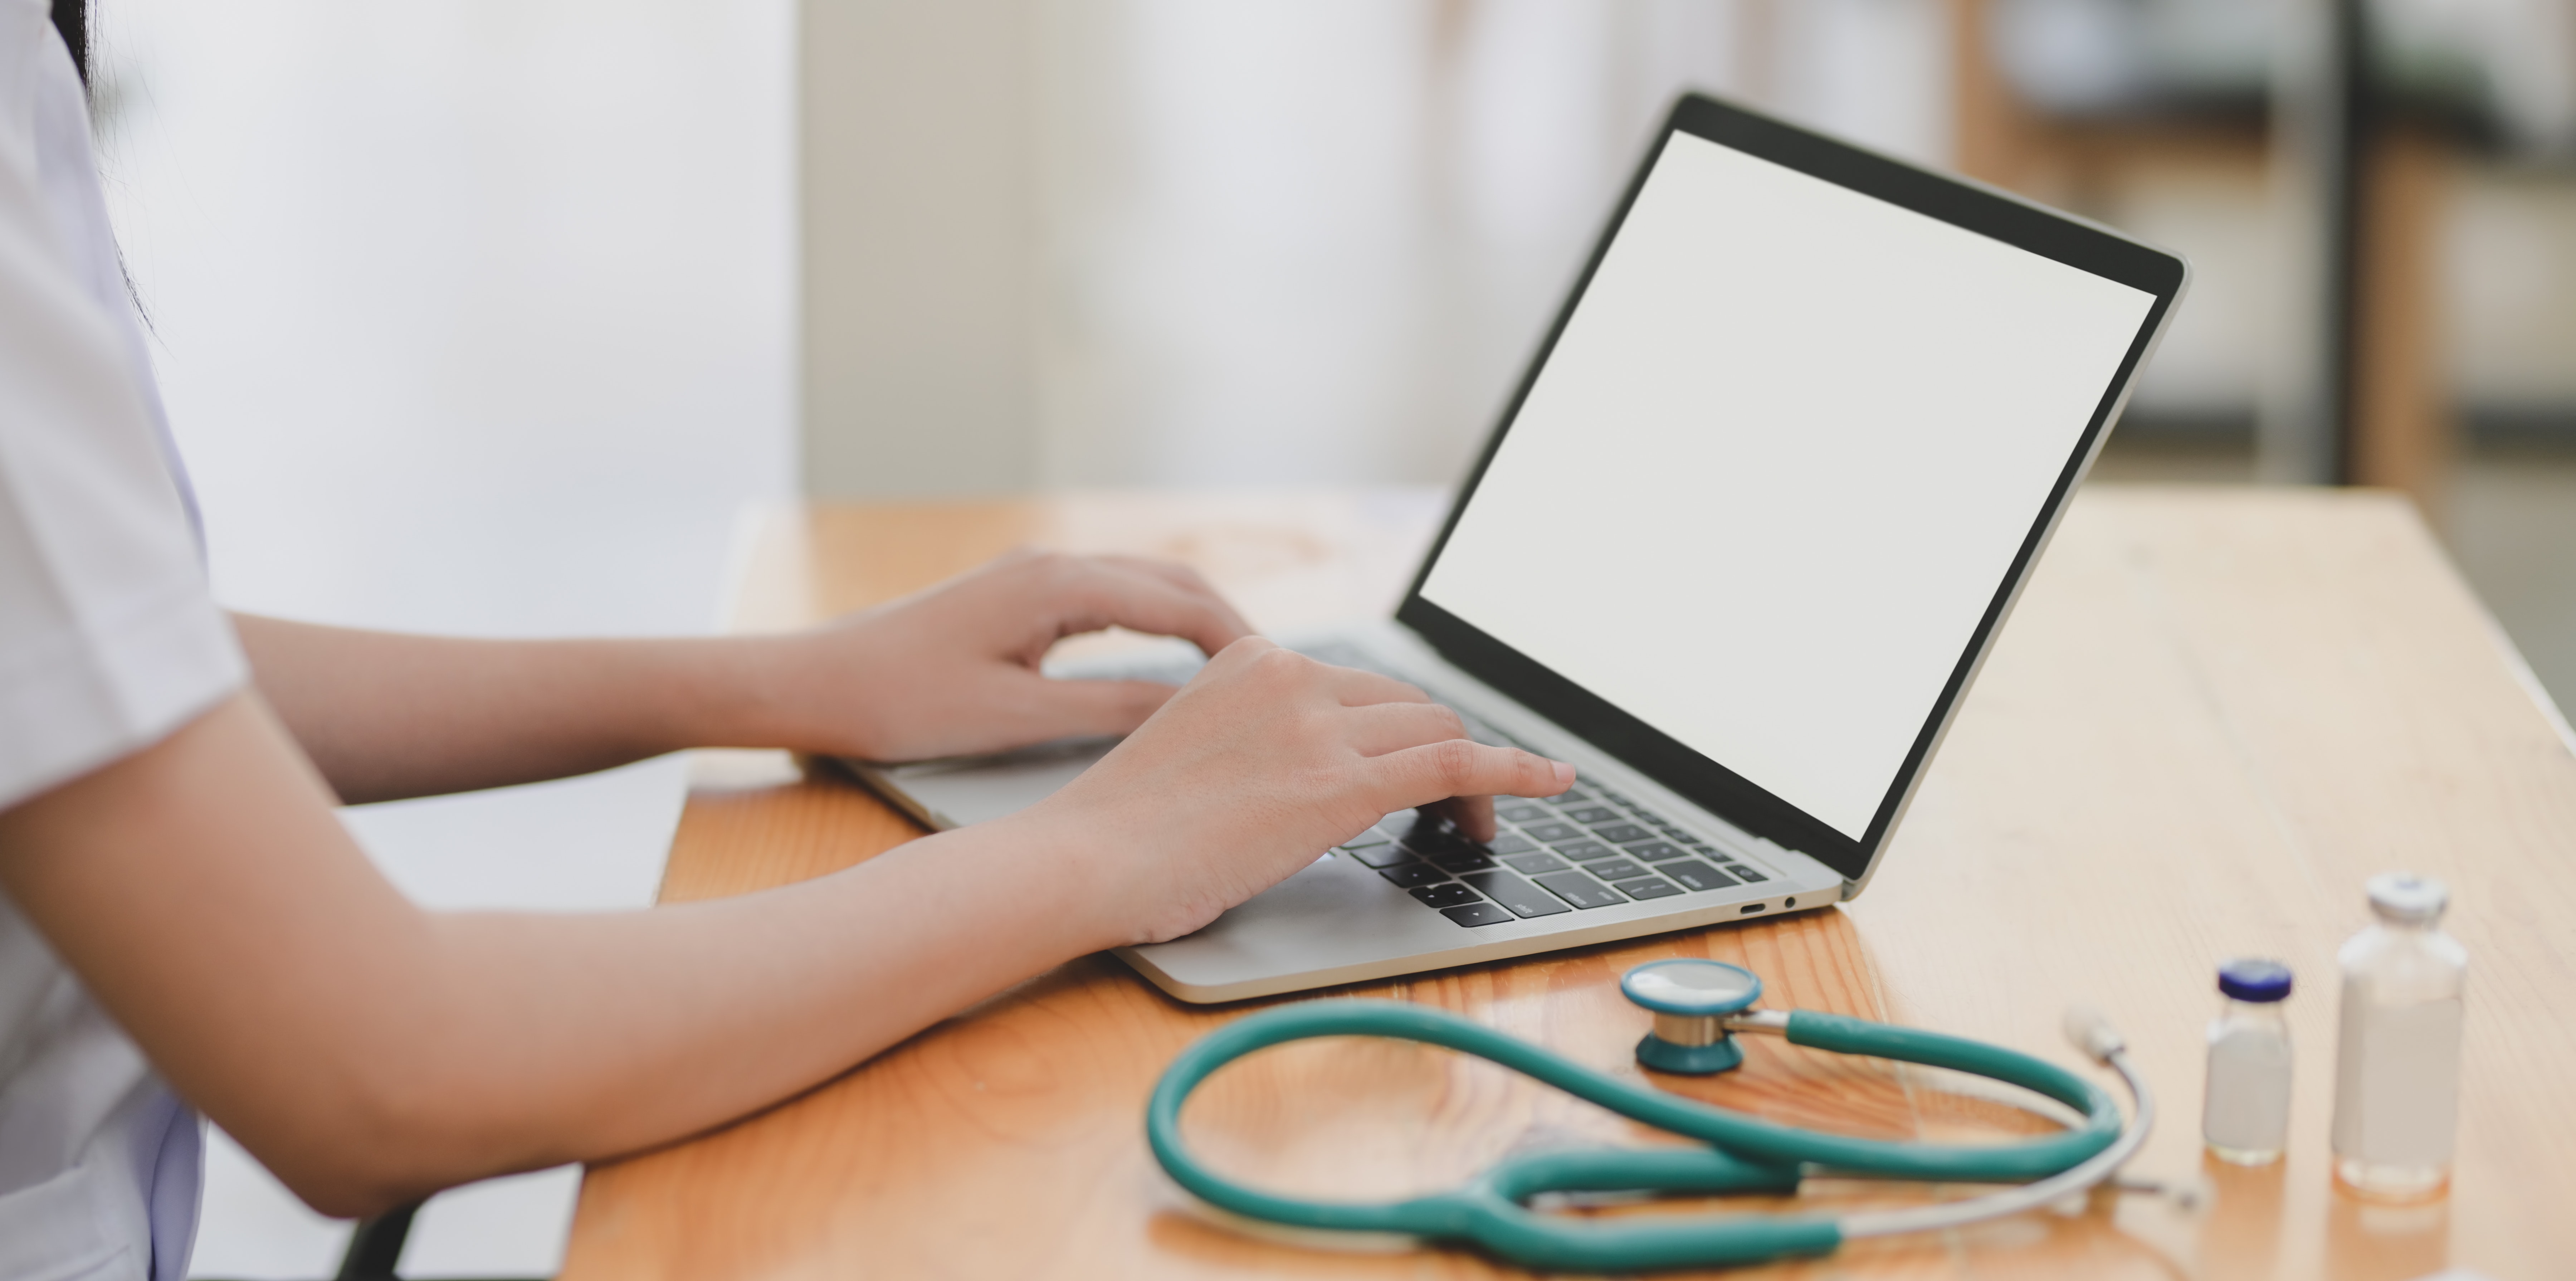 laptop-near-teal-stethoscope-in-wooden-table-3758756